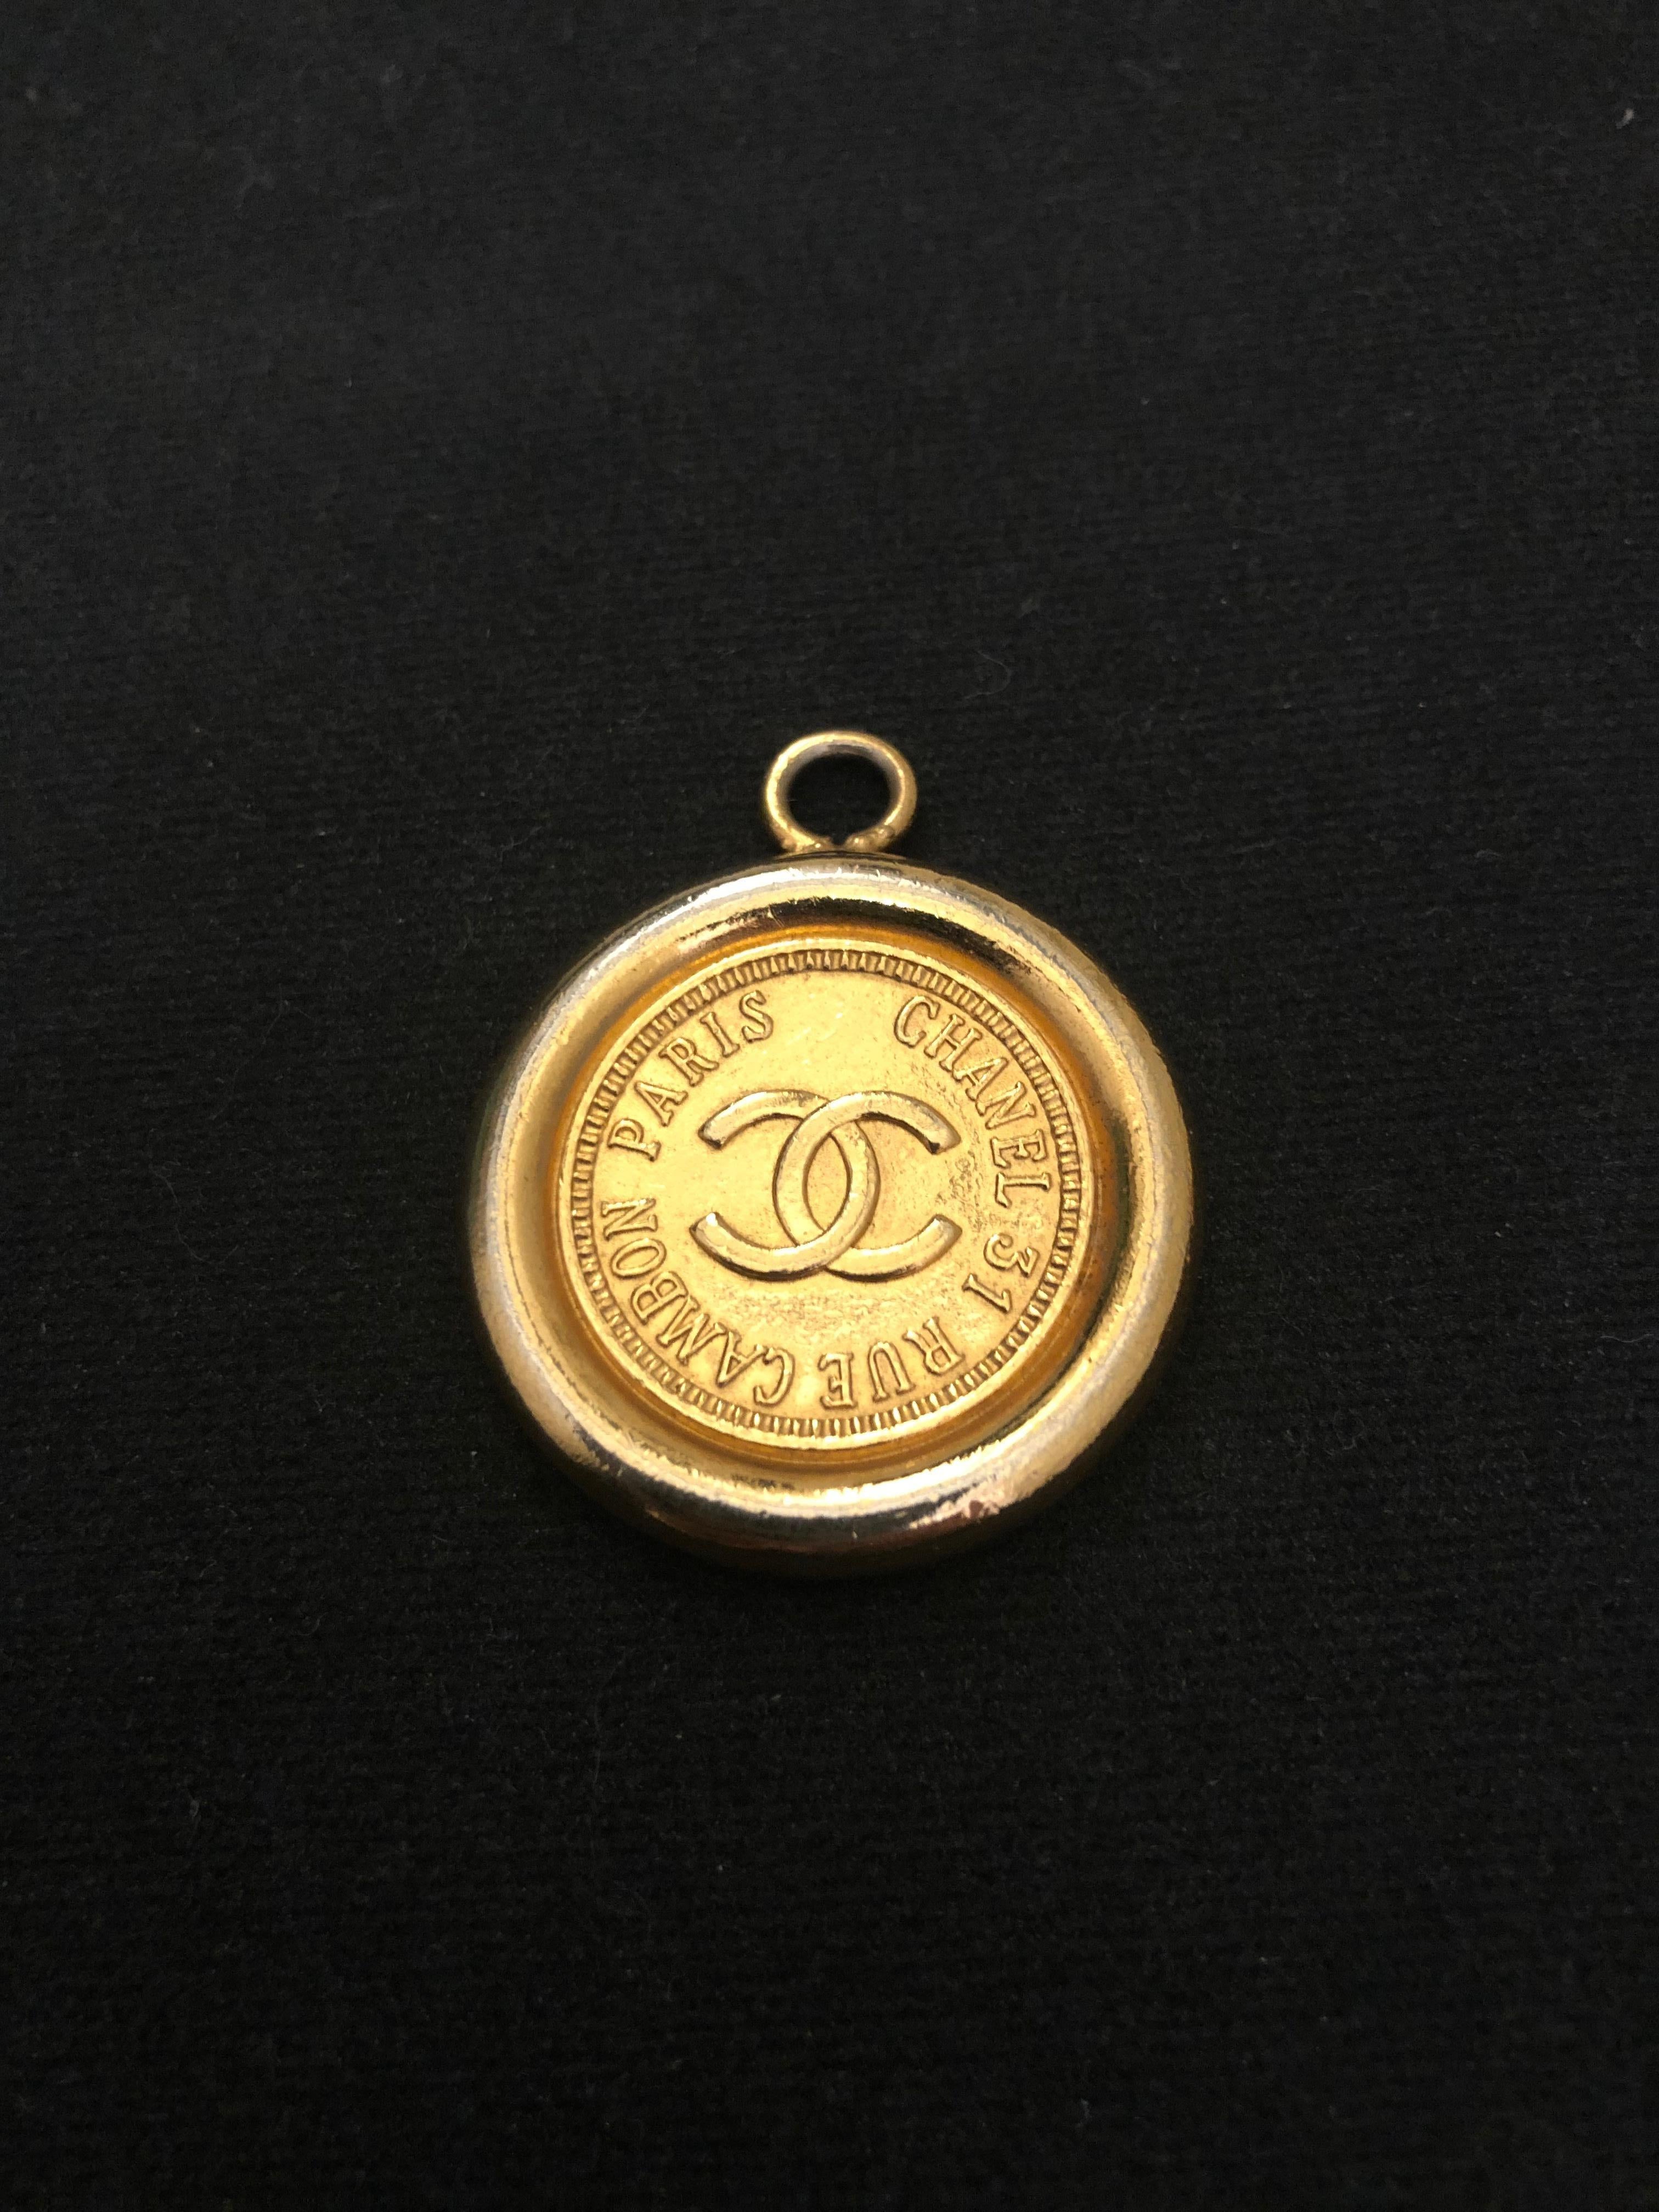 1980s CHANEL gold toned Cambon coin charm which used to be part of a vintage Chanel chain belt. Measures 3.3 cm in diameter. 

Condition: Some signs of wear consistent with age and normal use. 

Scratches and discoloration.